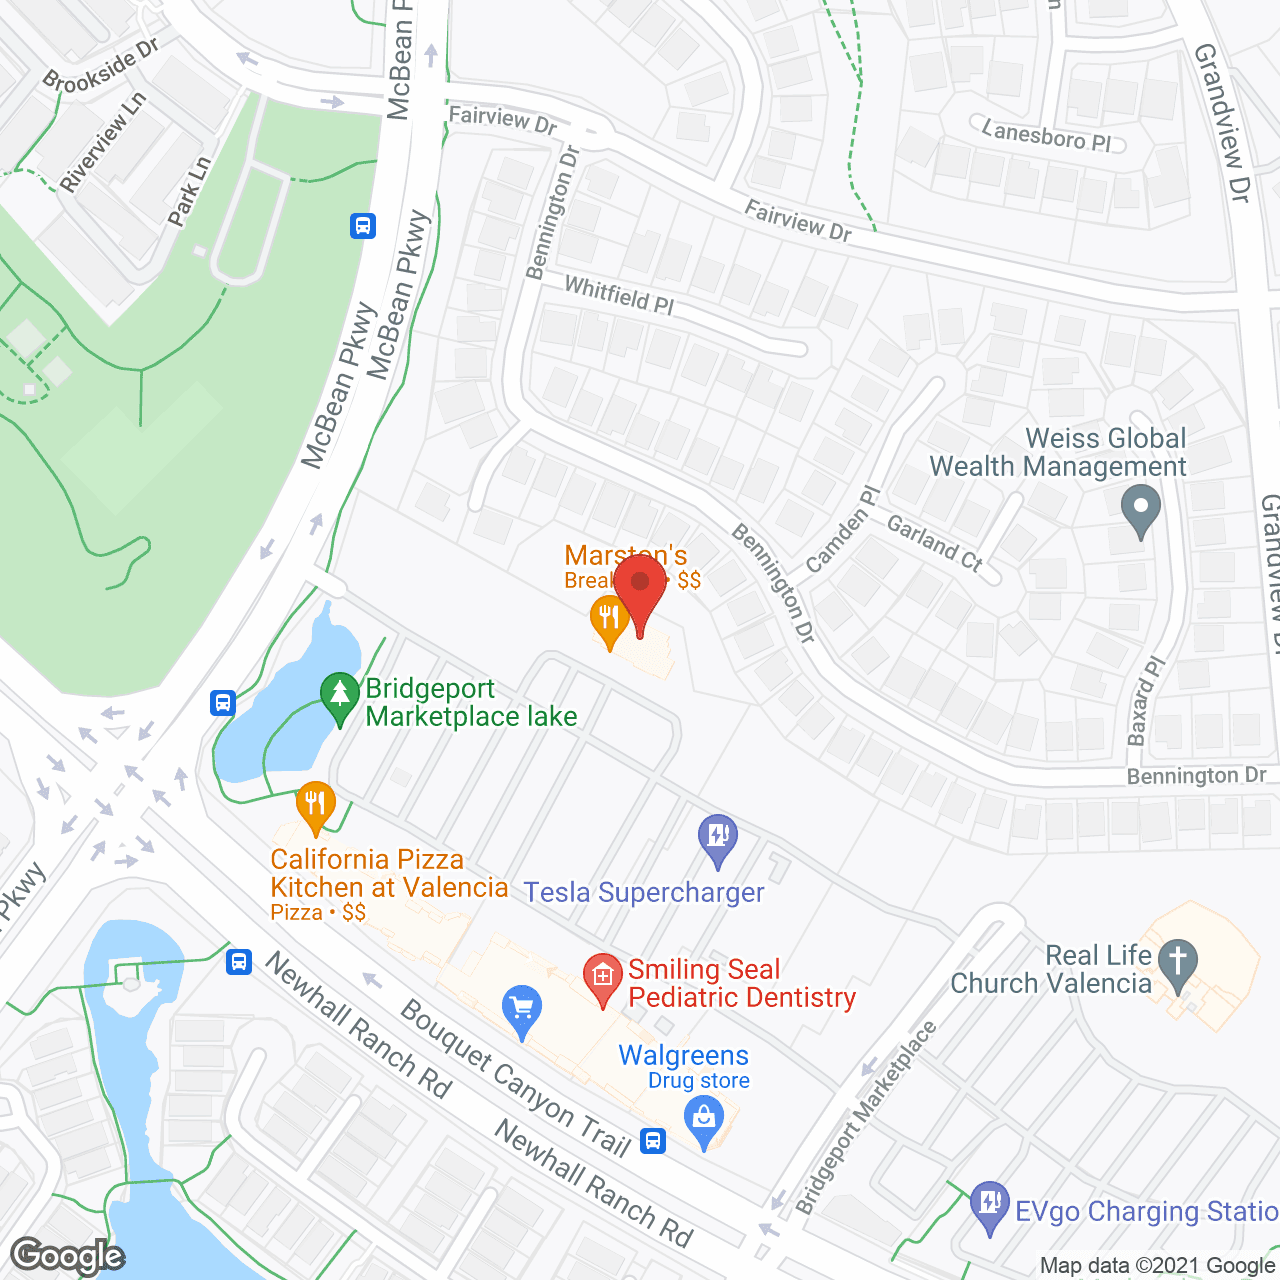 Visiting Angels of Valencia in google map